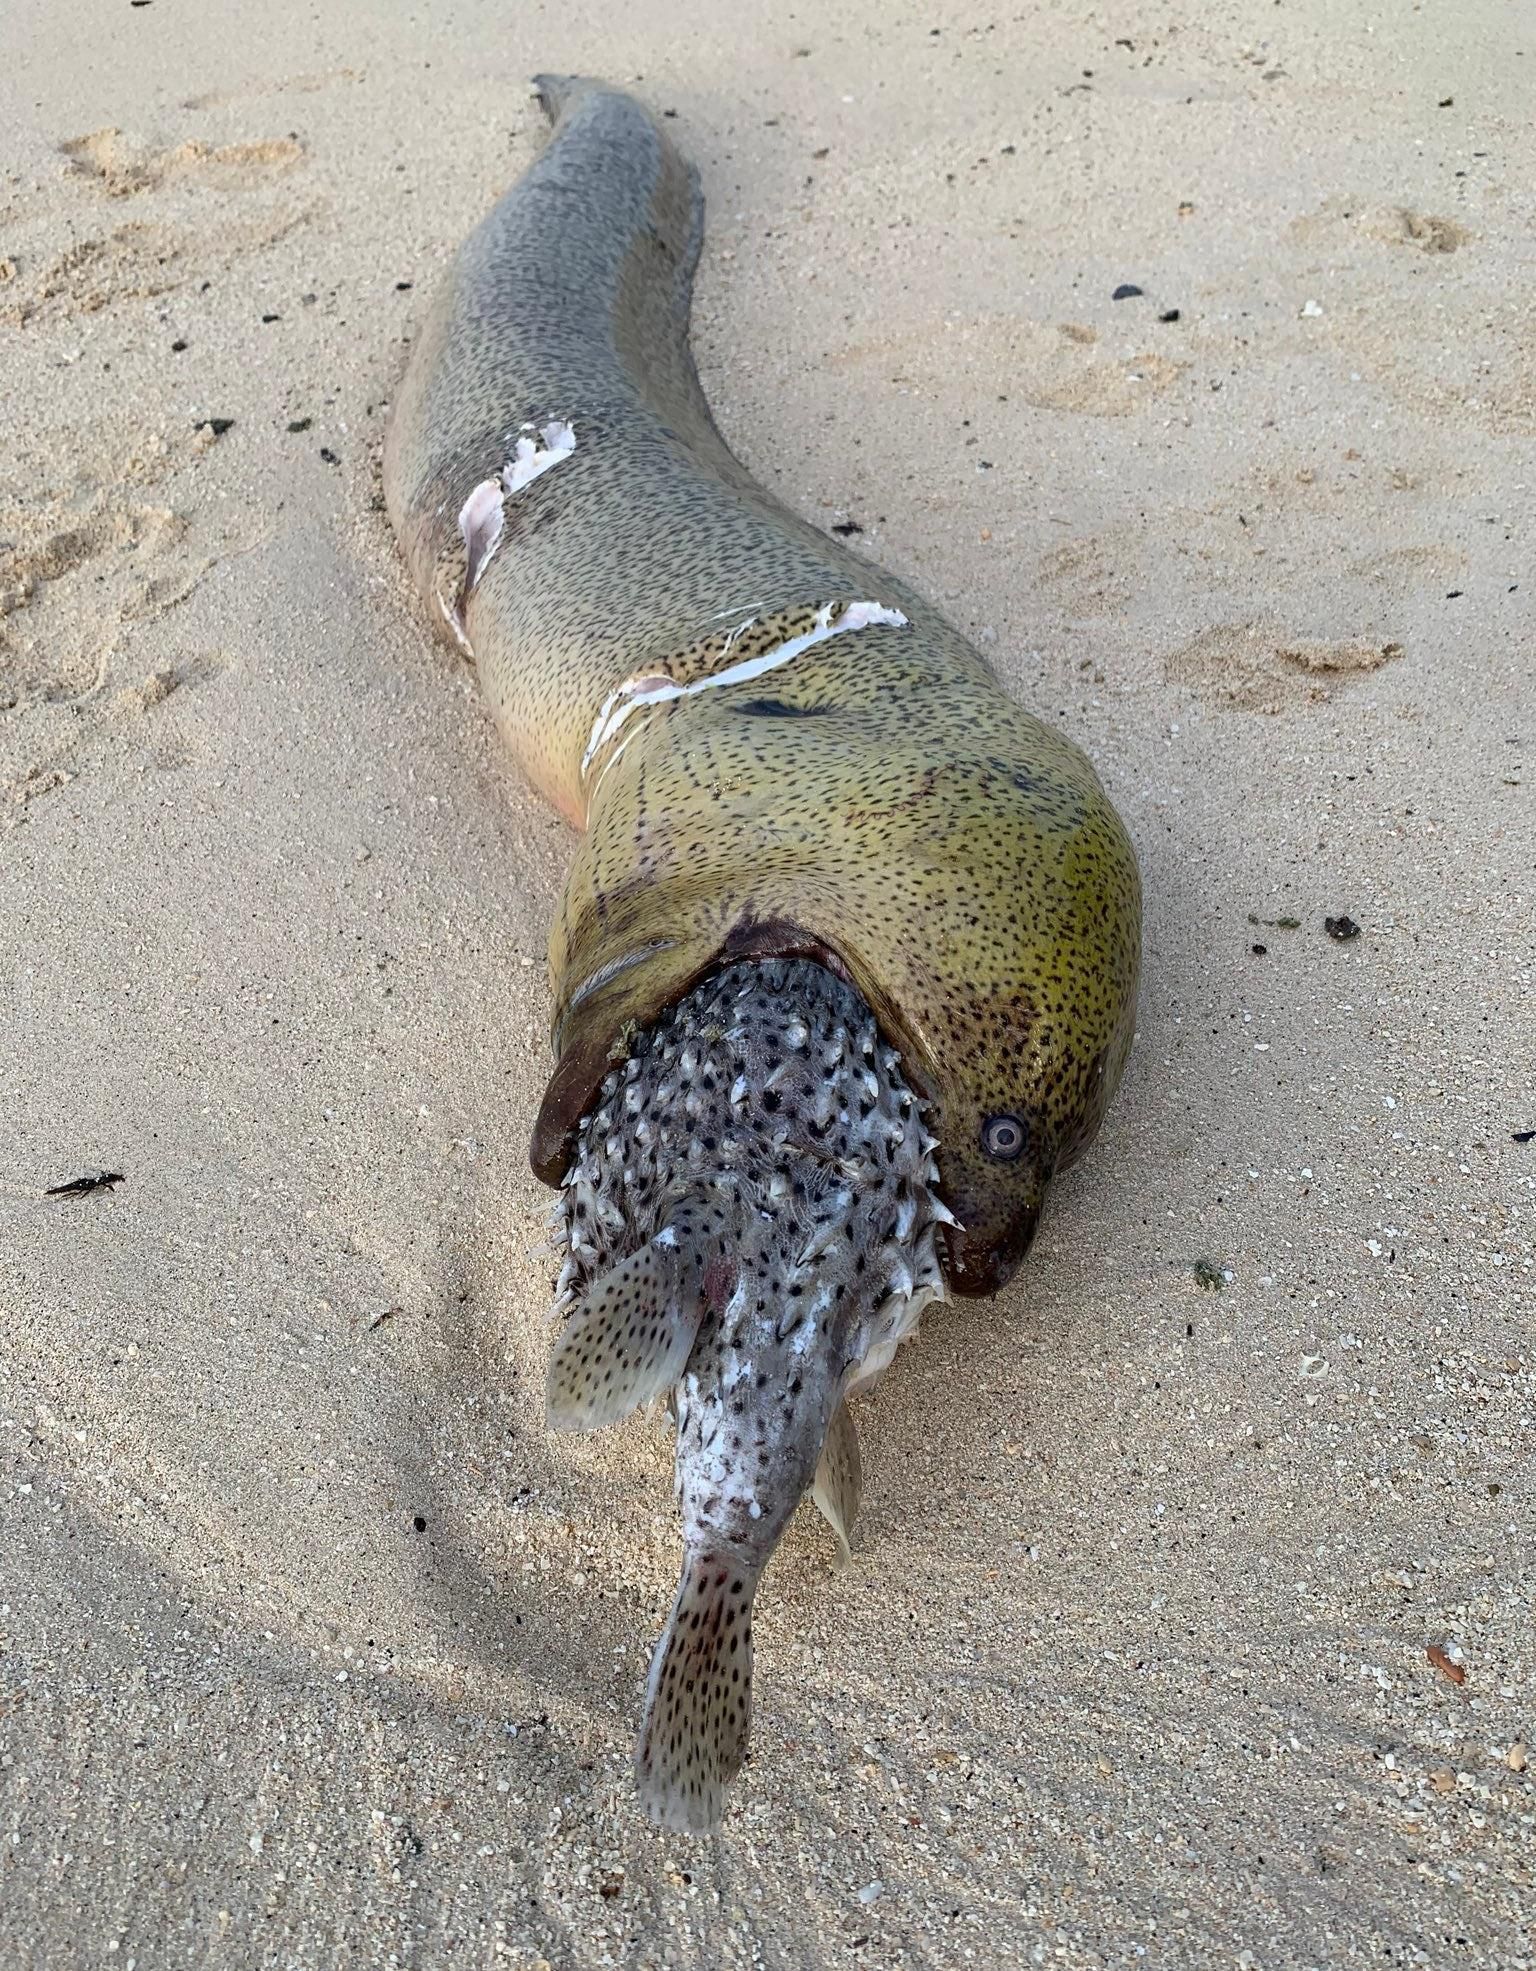 What's that long looking Eel that has choked on its meal? That's a Moray.